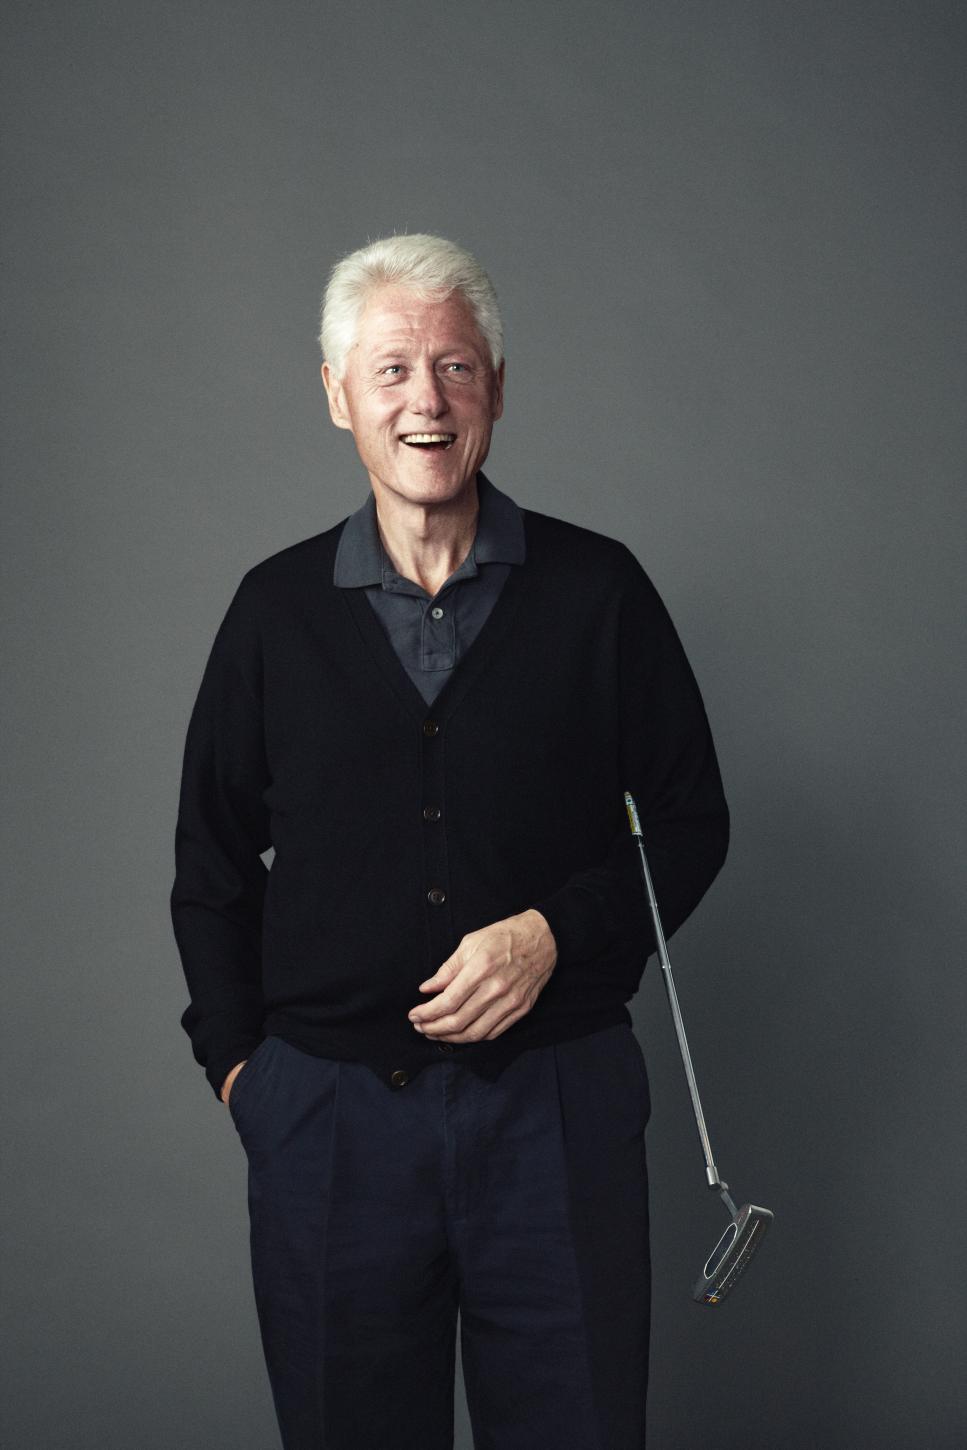 President Bill Clinton photographed by Walter Iooss Jr. at Liberty National Golf Club in Jersey City, NJ on September 10, 2012.